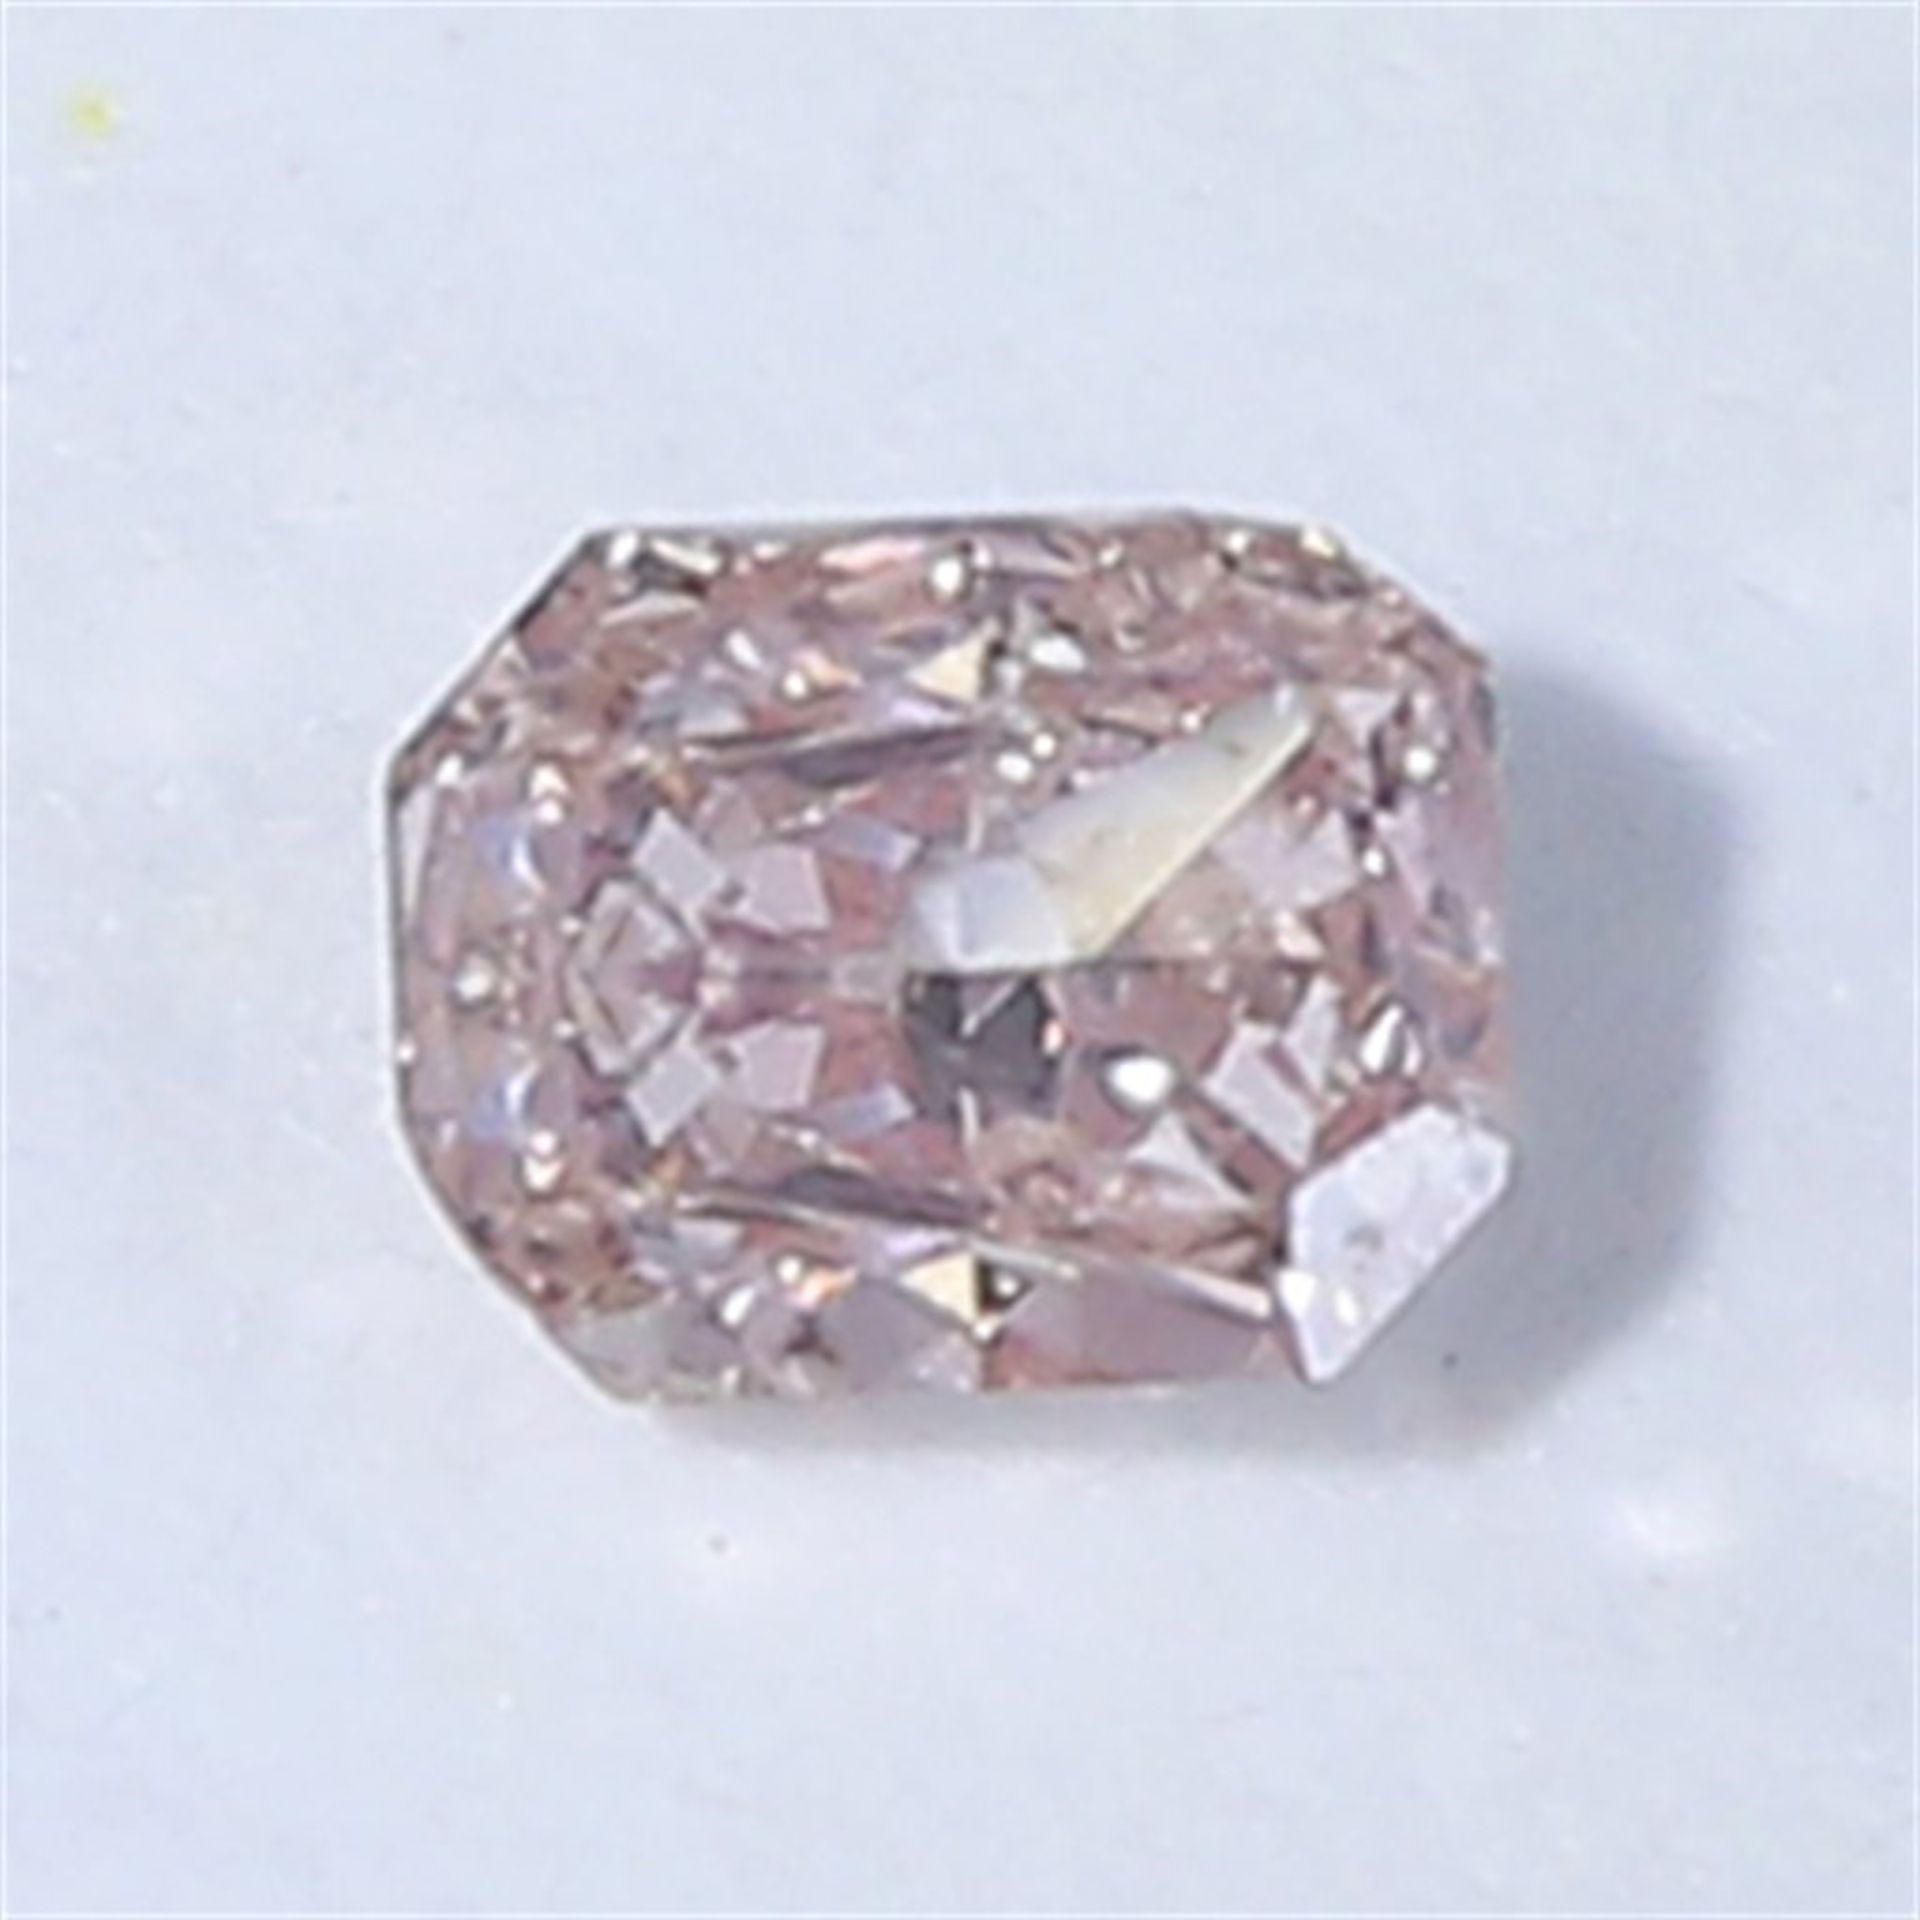 GIA Certified 0.08 ct. Fancy Orangy Pink Diamond